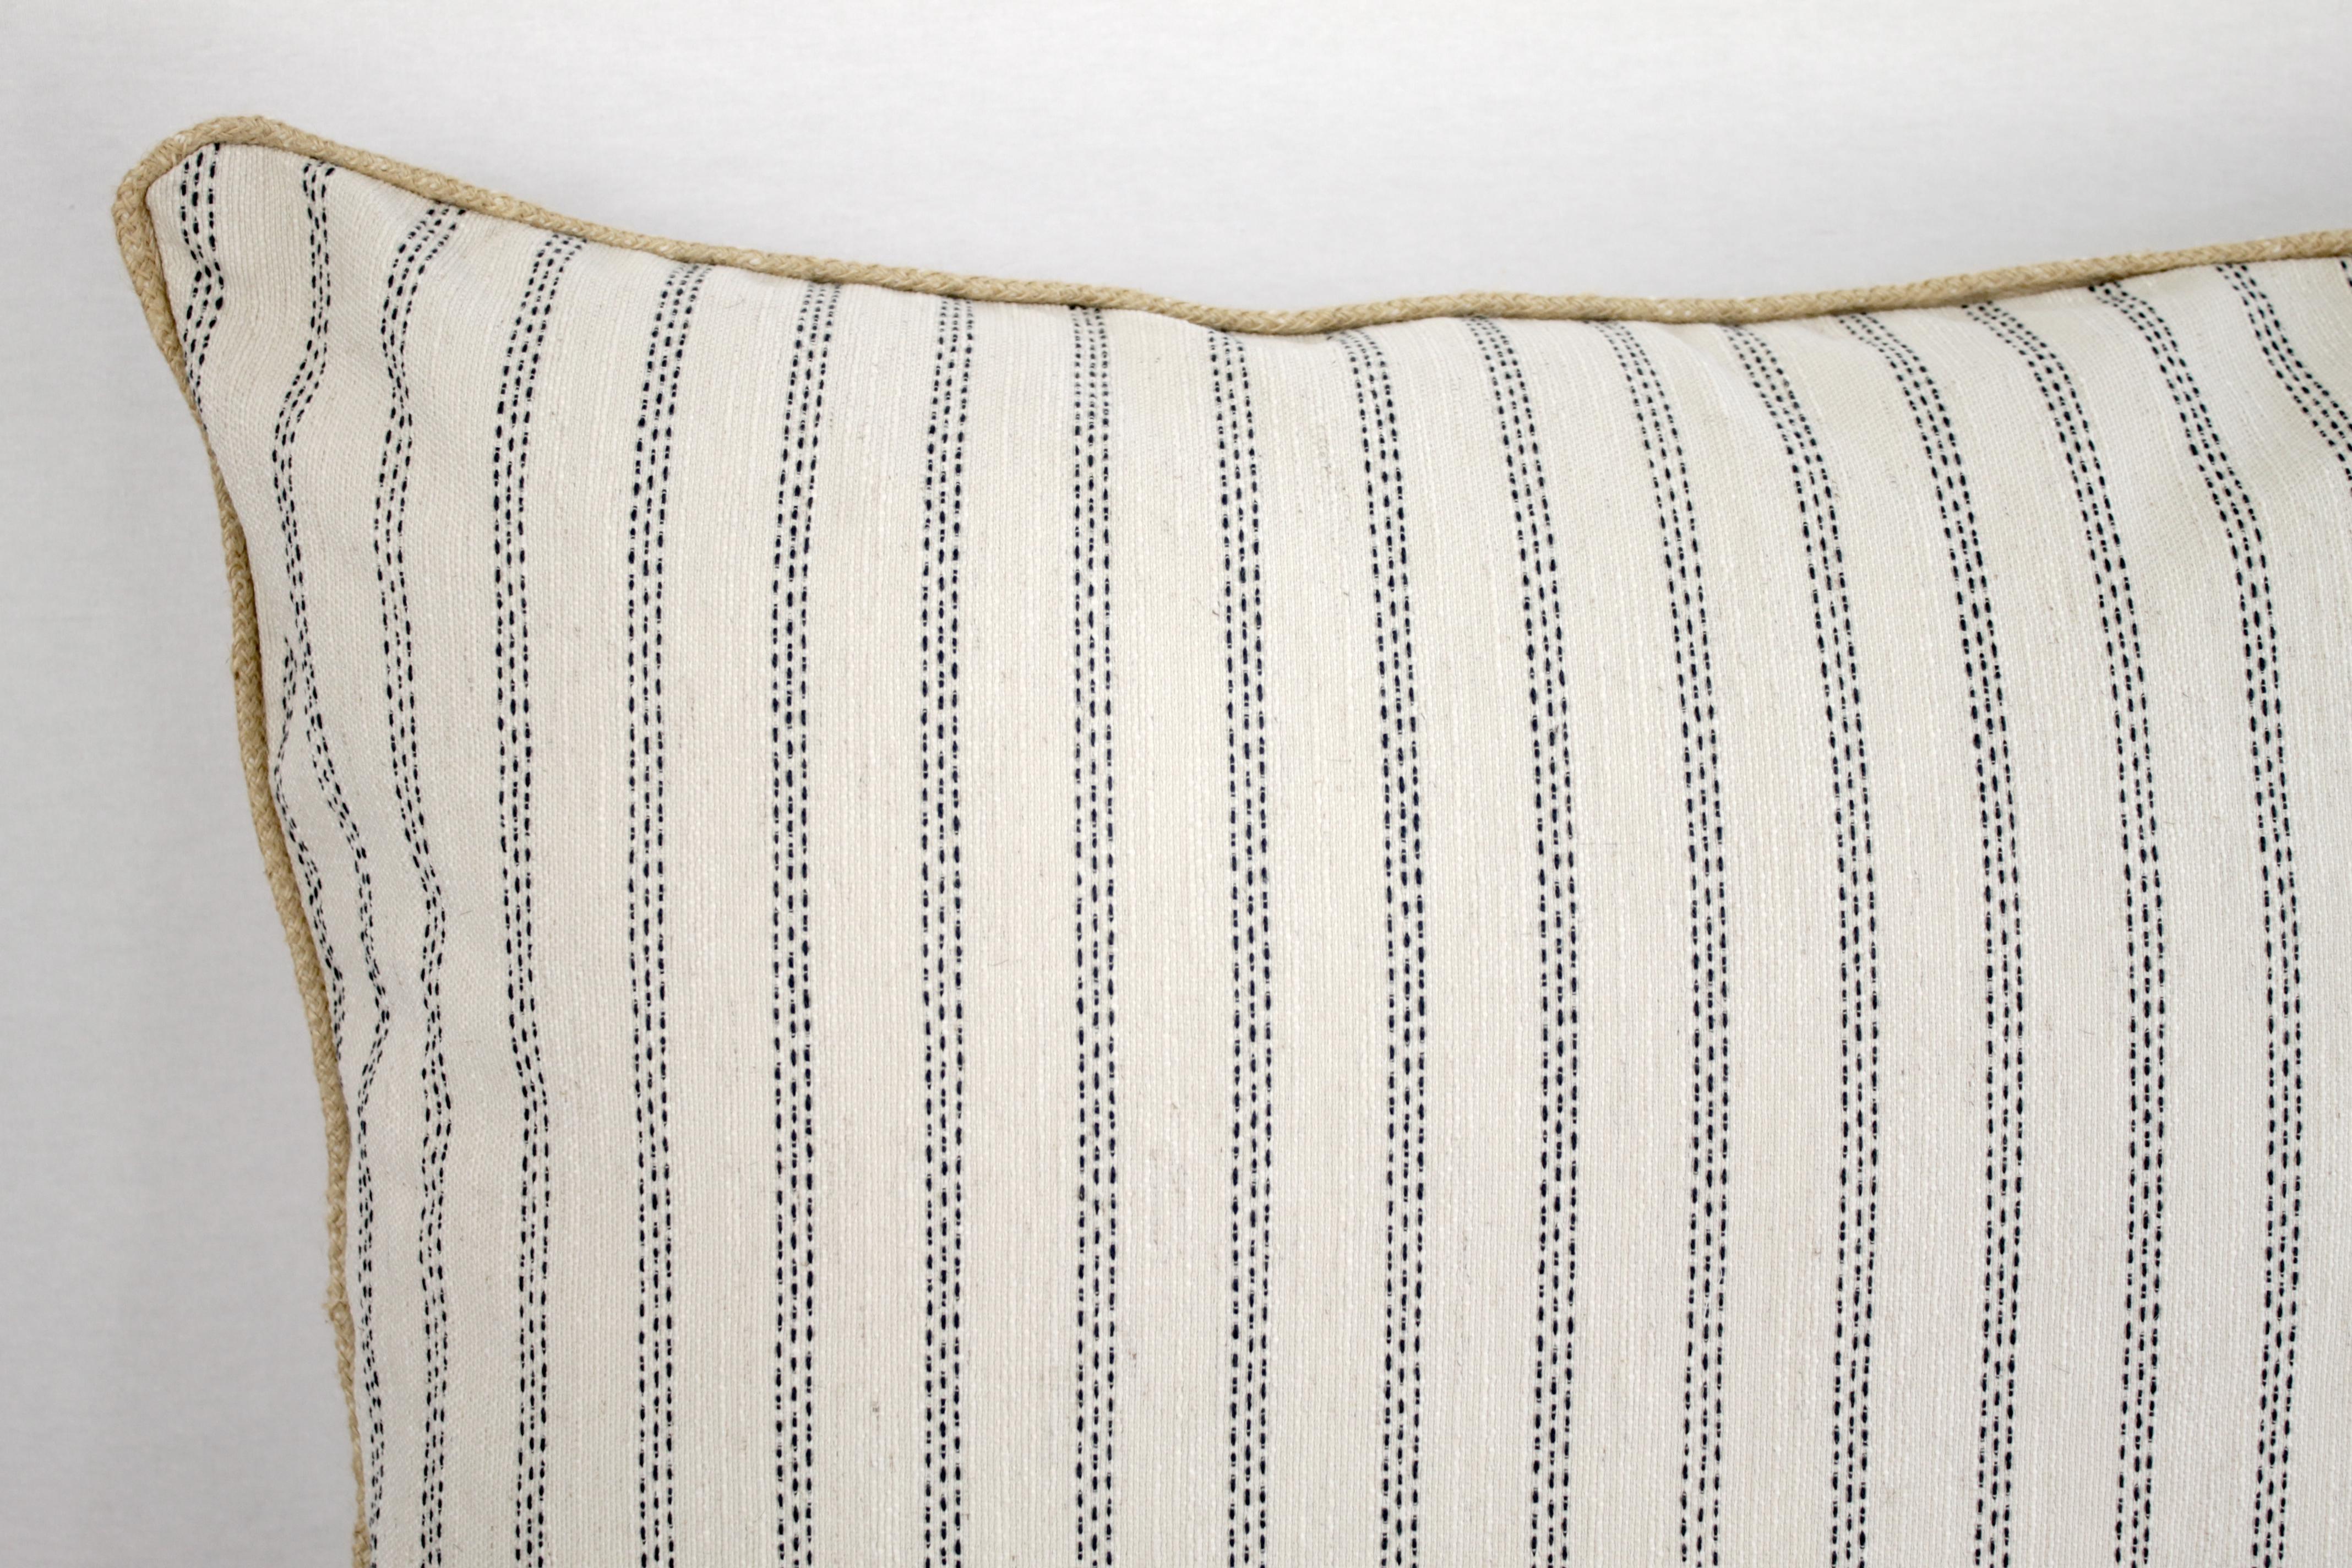 Custom natural and navy ticking stripe pillow with braided Jute cord zipper closure, machine washable. Measures: 26 x 26. No insert is included.